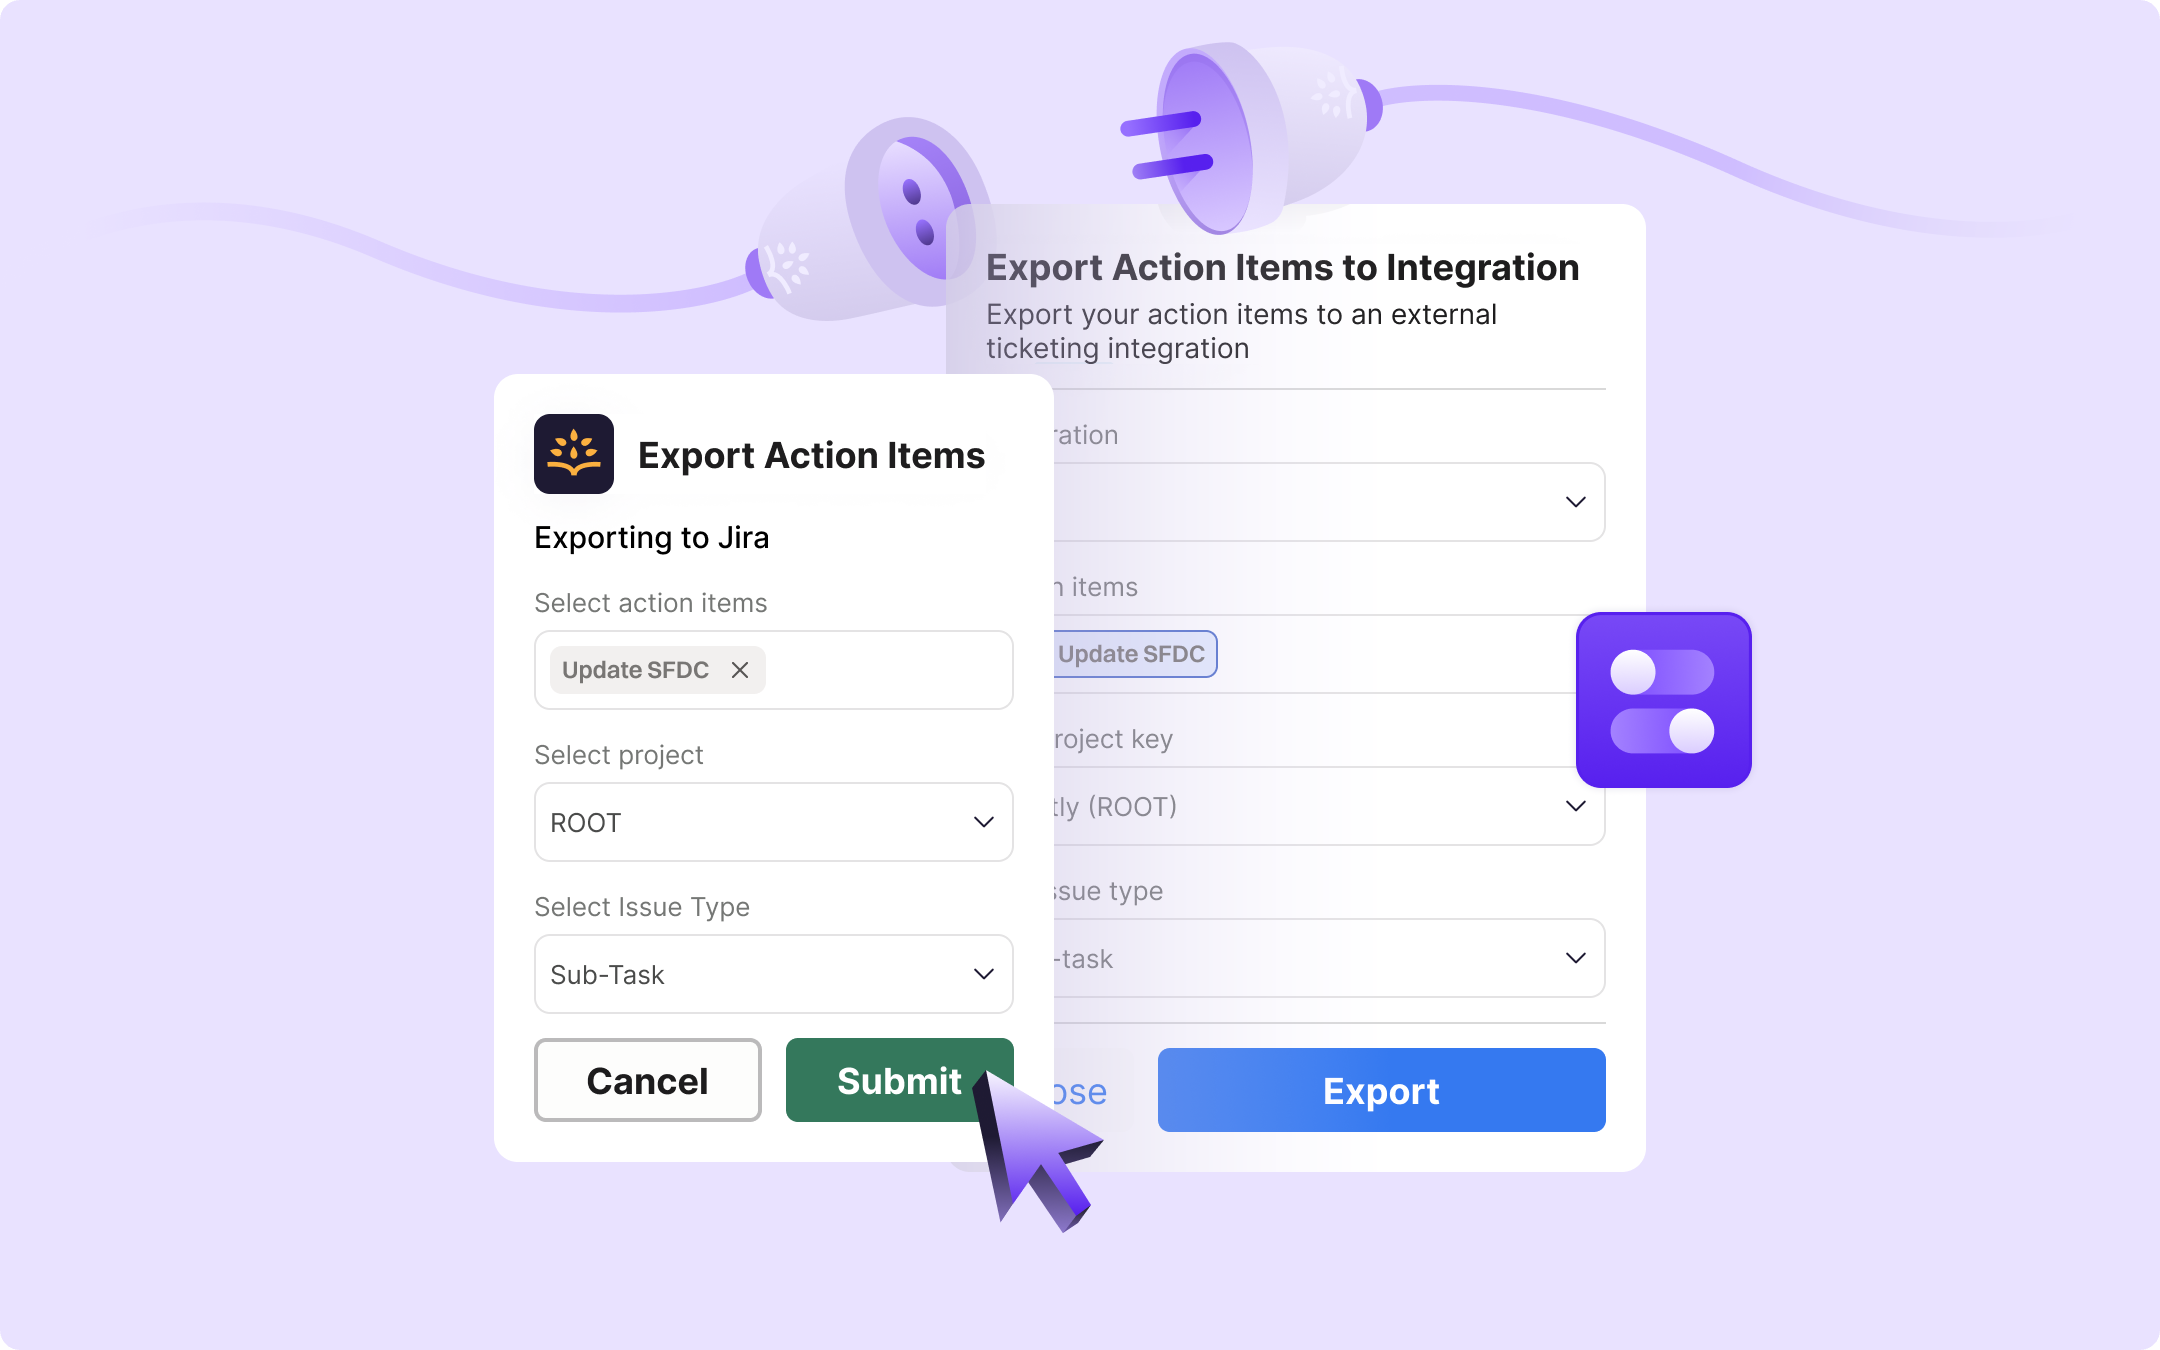 Manually Export Action Items to Ticketing Apps (Jira, Zendesk, Linear, and more)